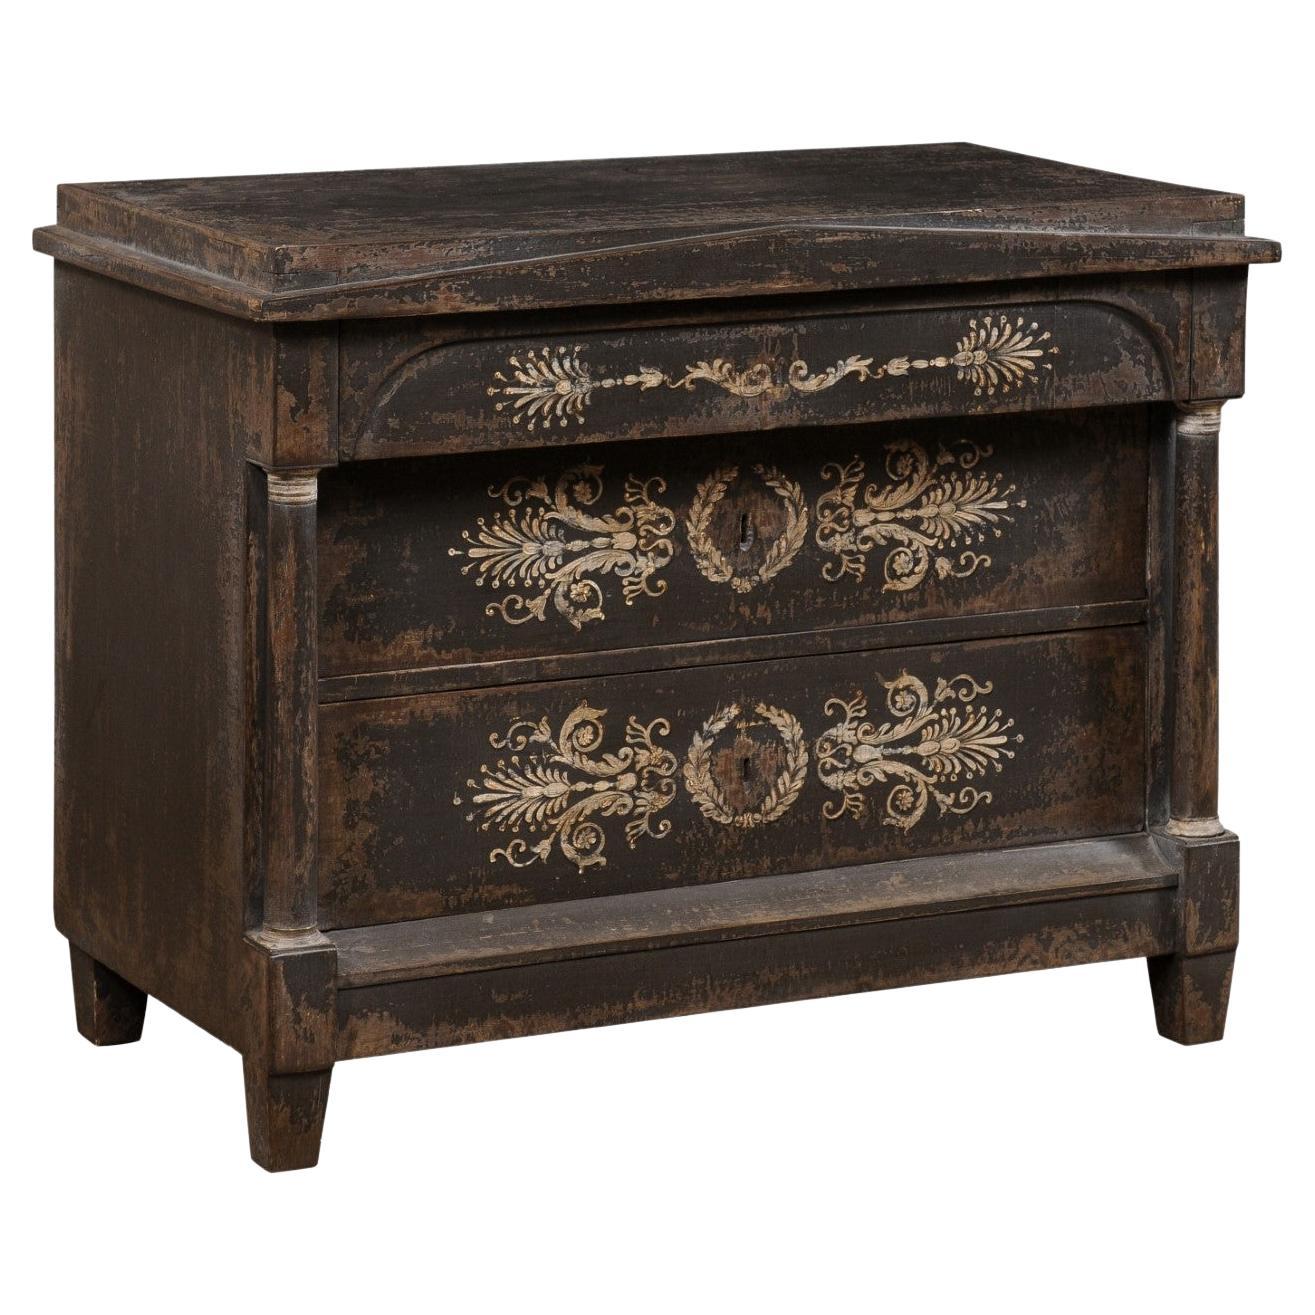 French Empire Artisan-Painted Commode, 19th Century For Sale